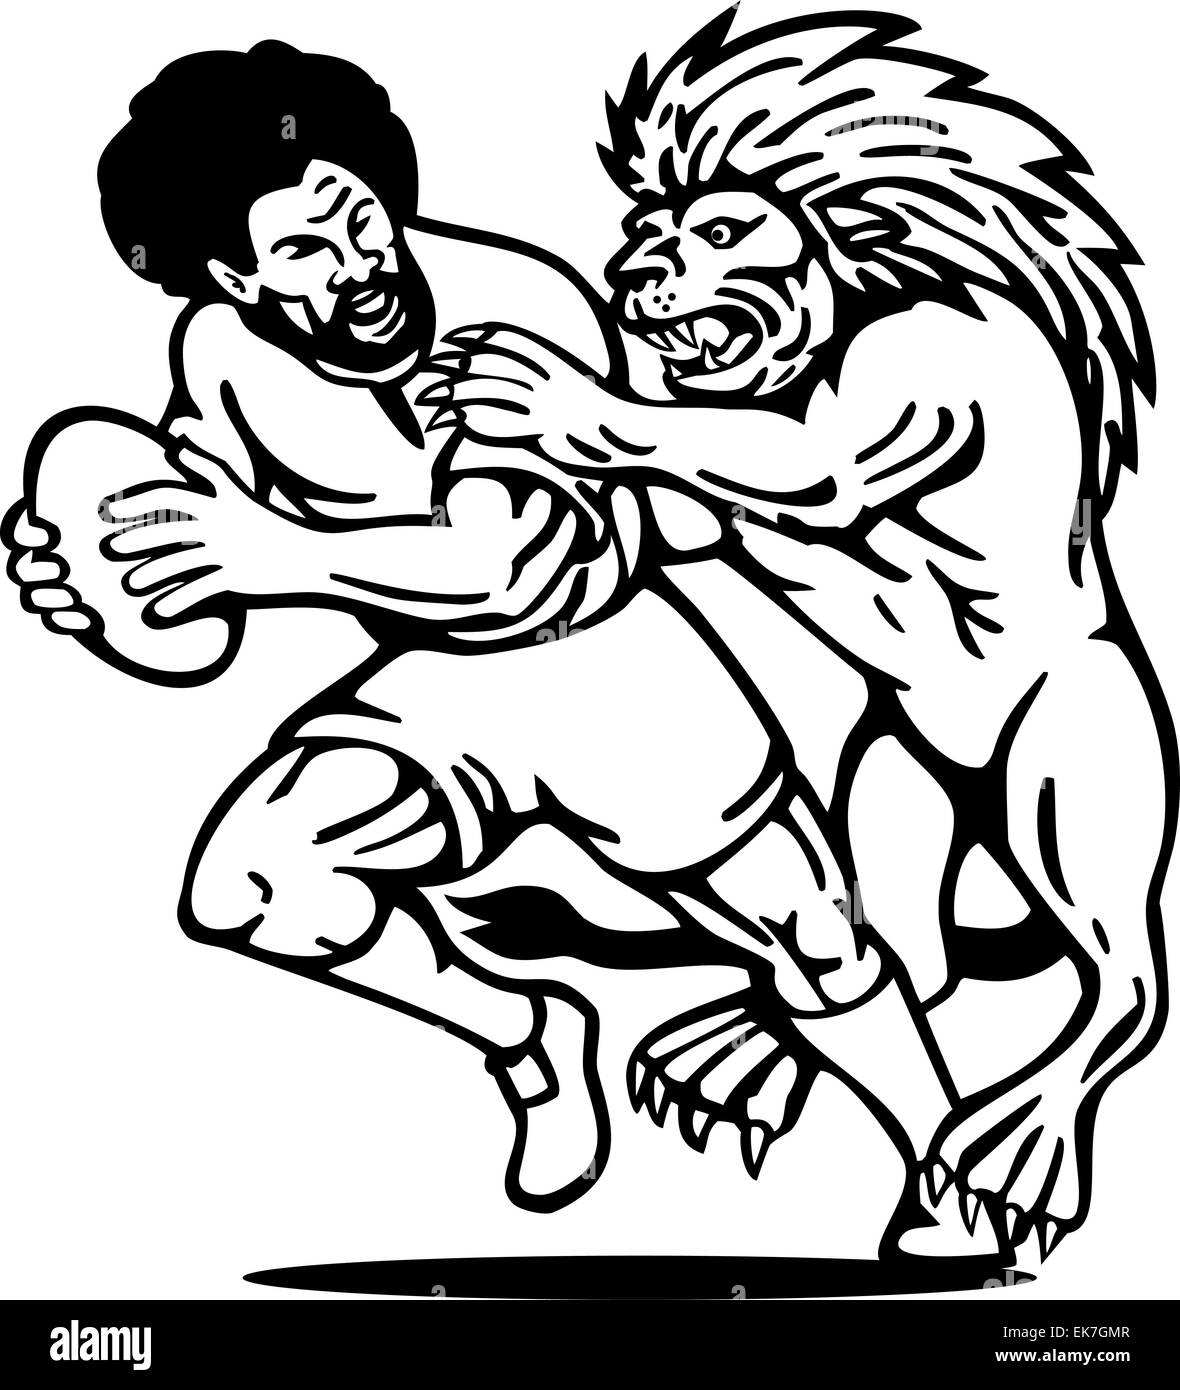 Rugby player running with ball attack by lion Stock Photo